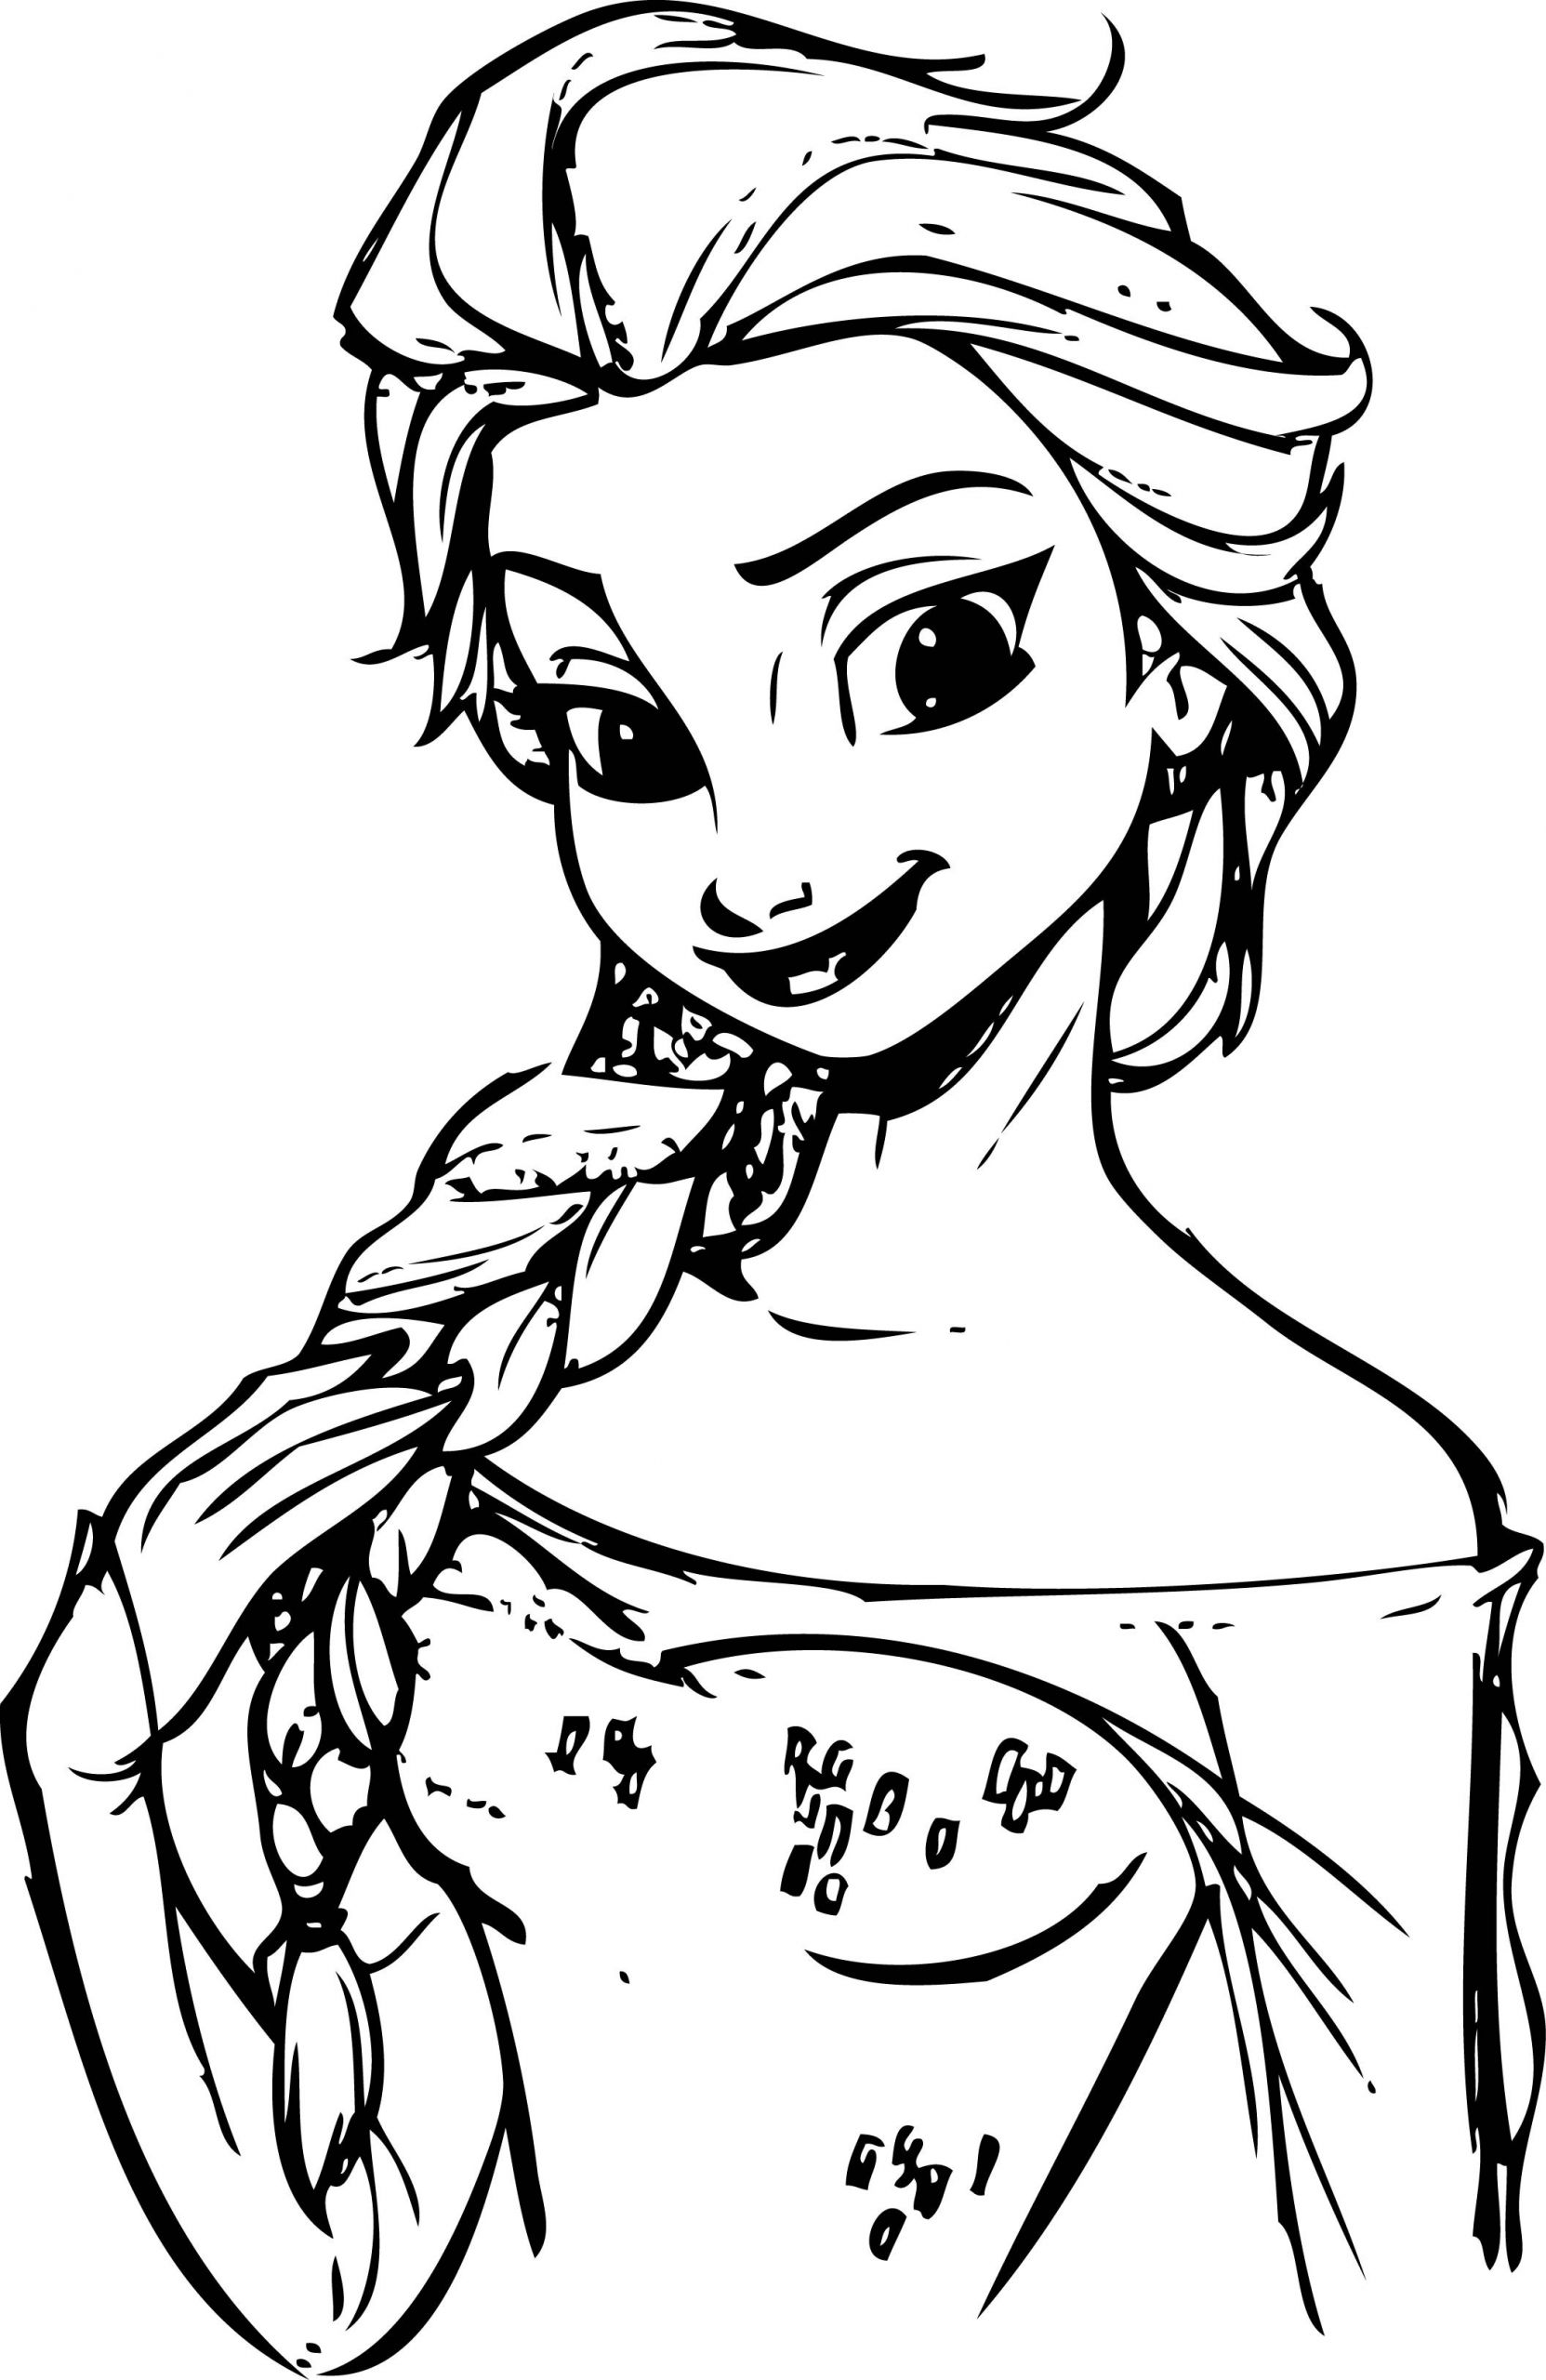 Coloring Pages For Little Girls
 Frozen Anna Elsa Coloring Page